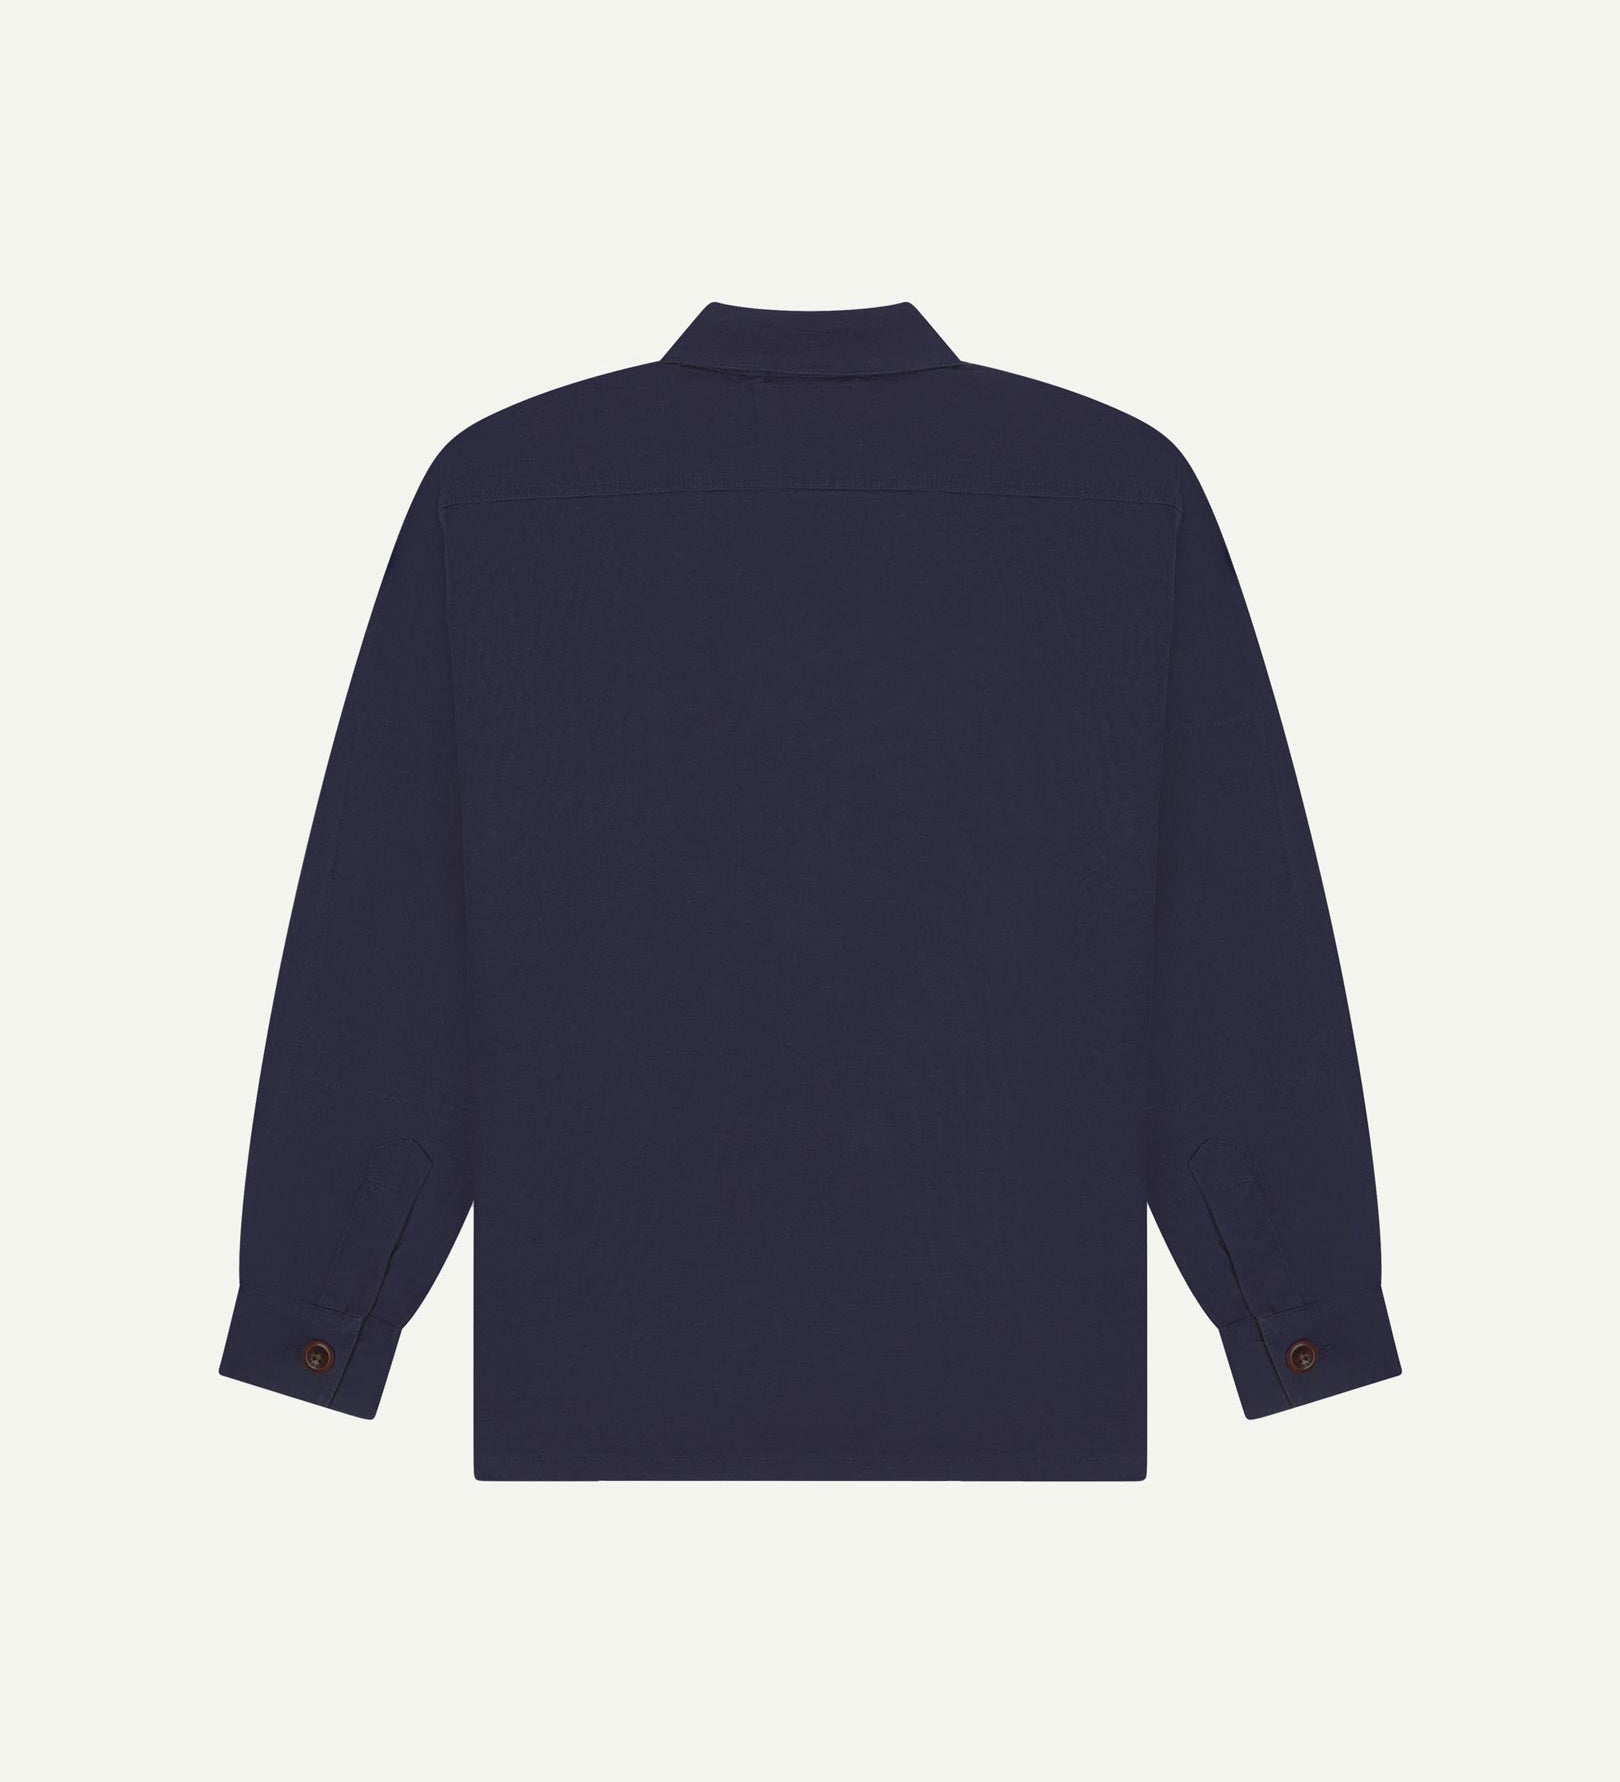 Reverse of midnight blue buttoned organic cotton workshirt from Uskees showing reinforced elbows, tailored cuffs and boxy silhouette.